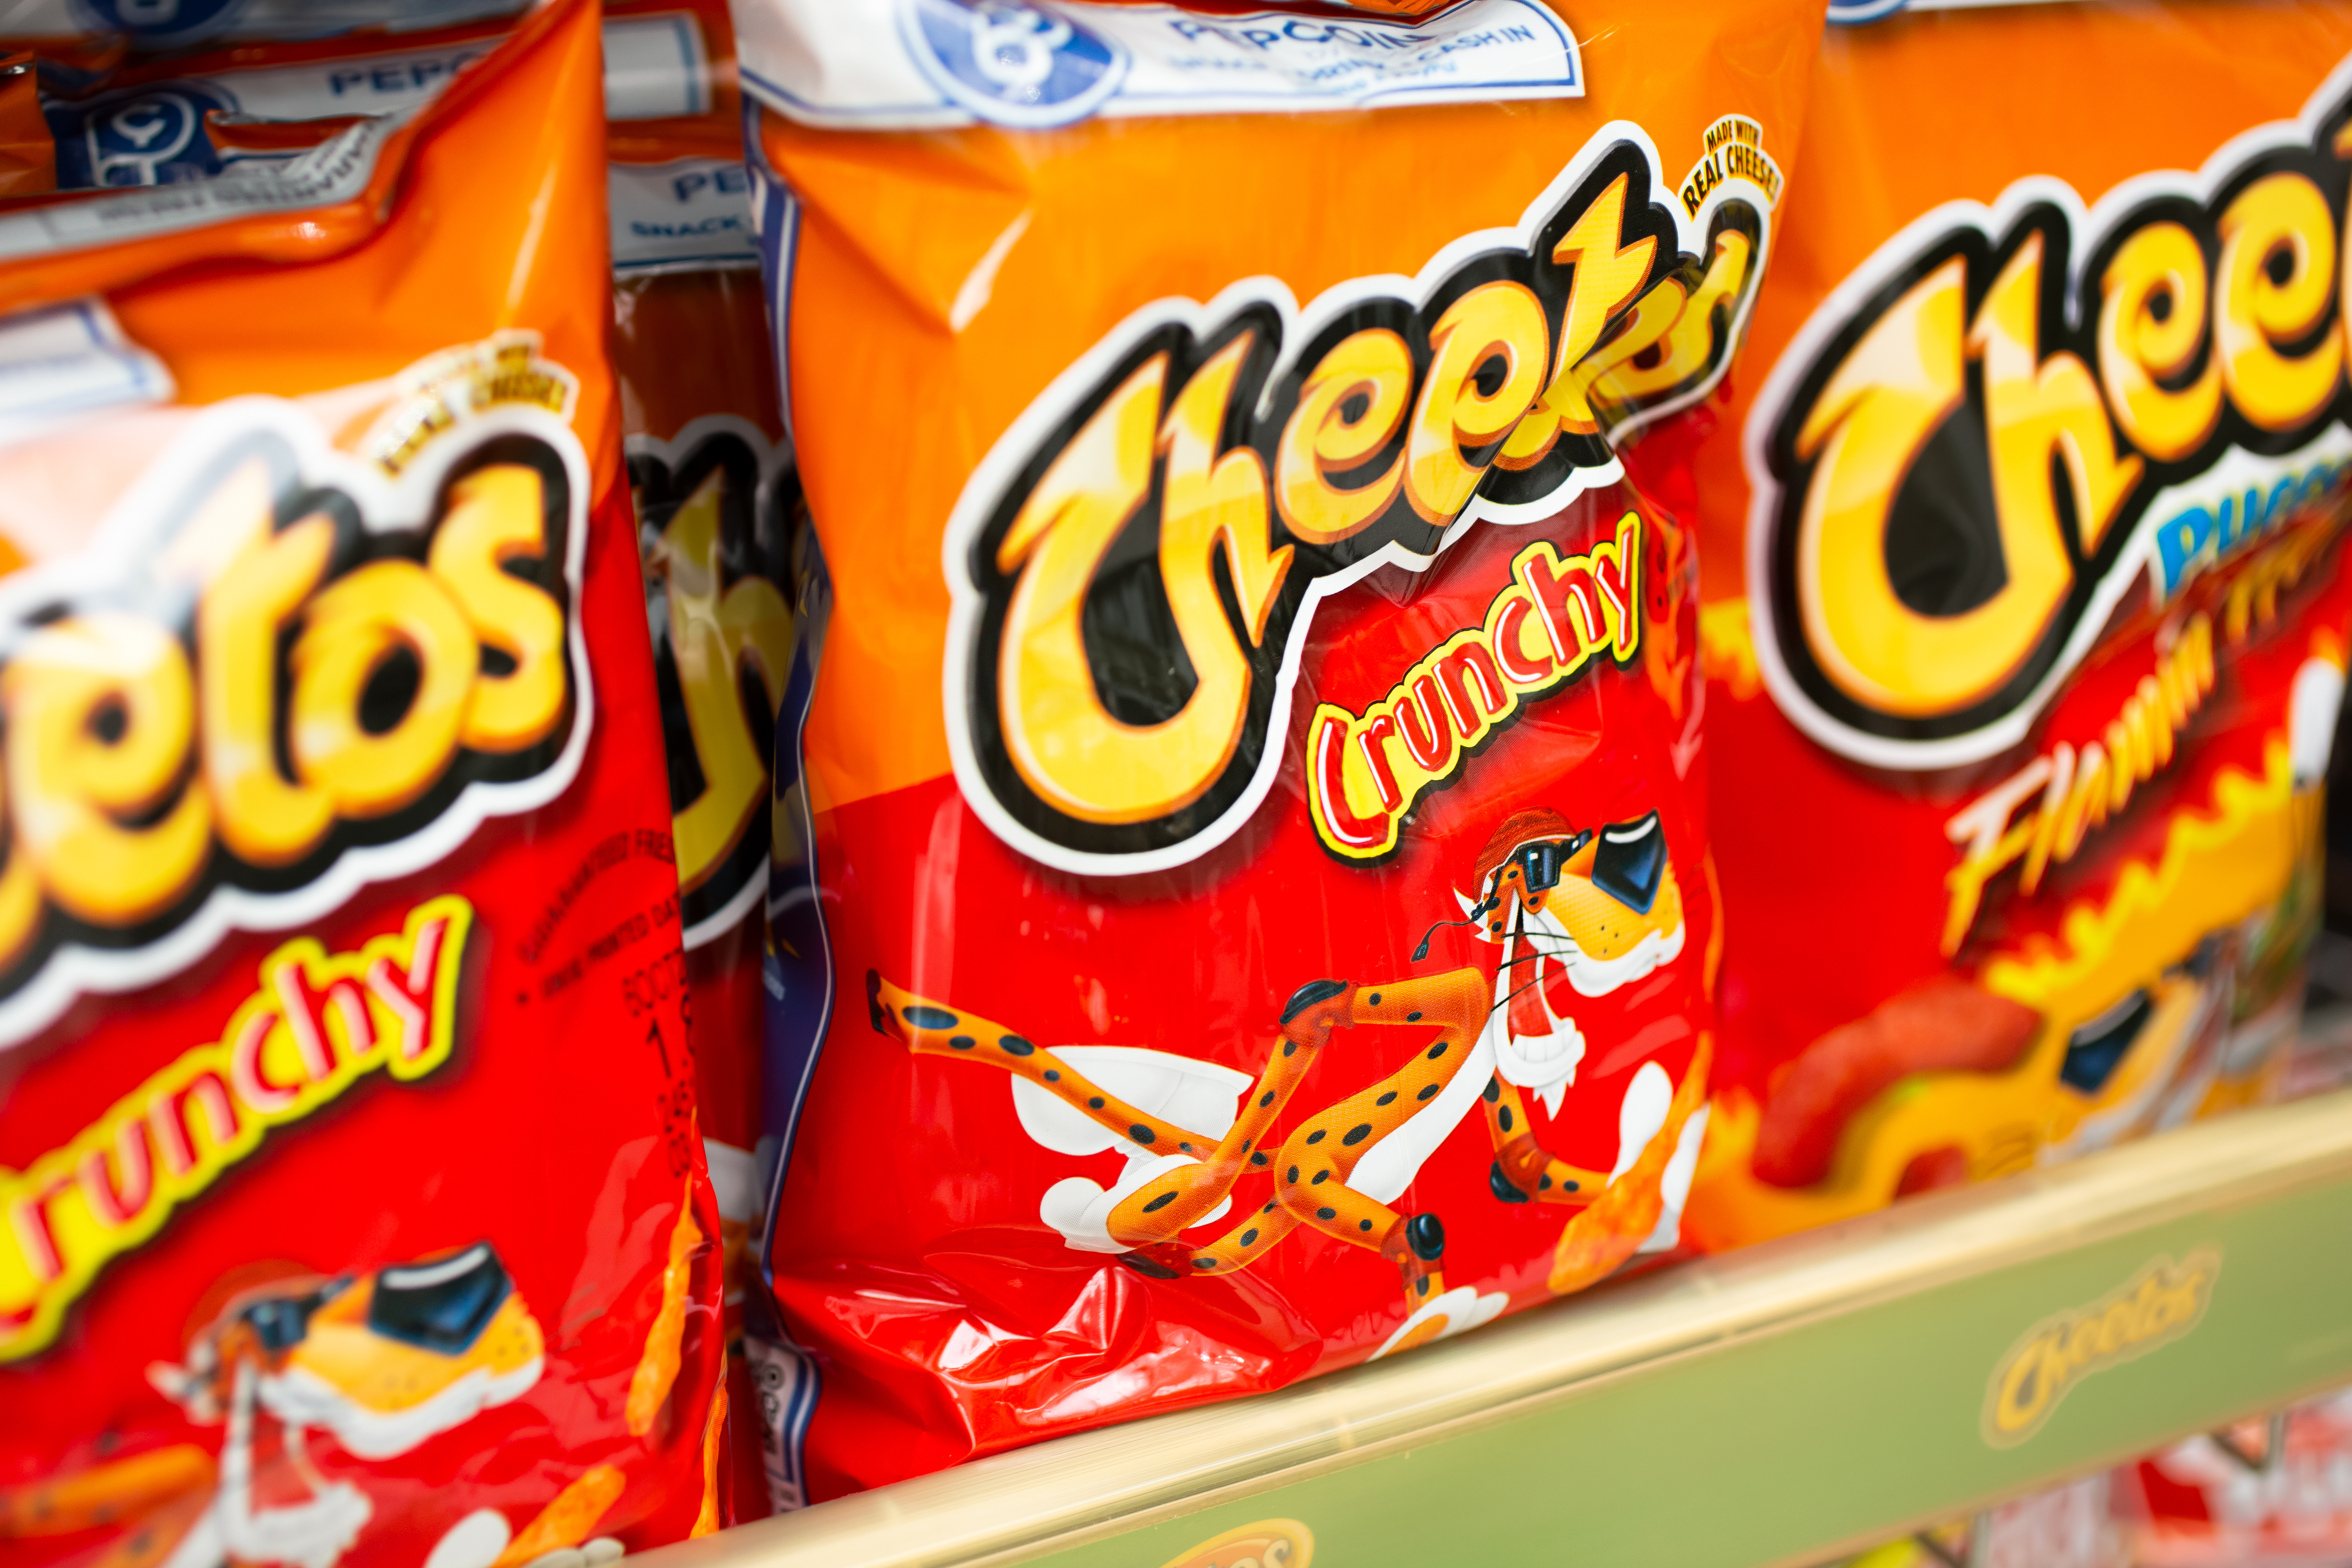 Man hides .4 billion worth of Bitcoin in a can of Cheetos popcorn